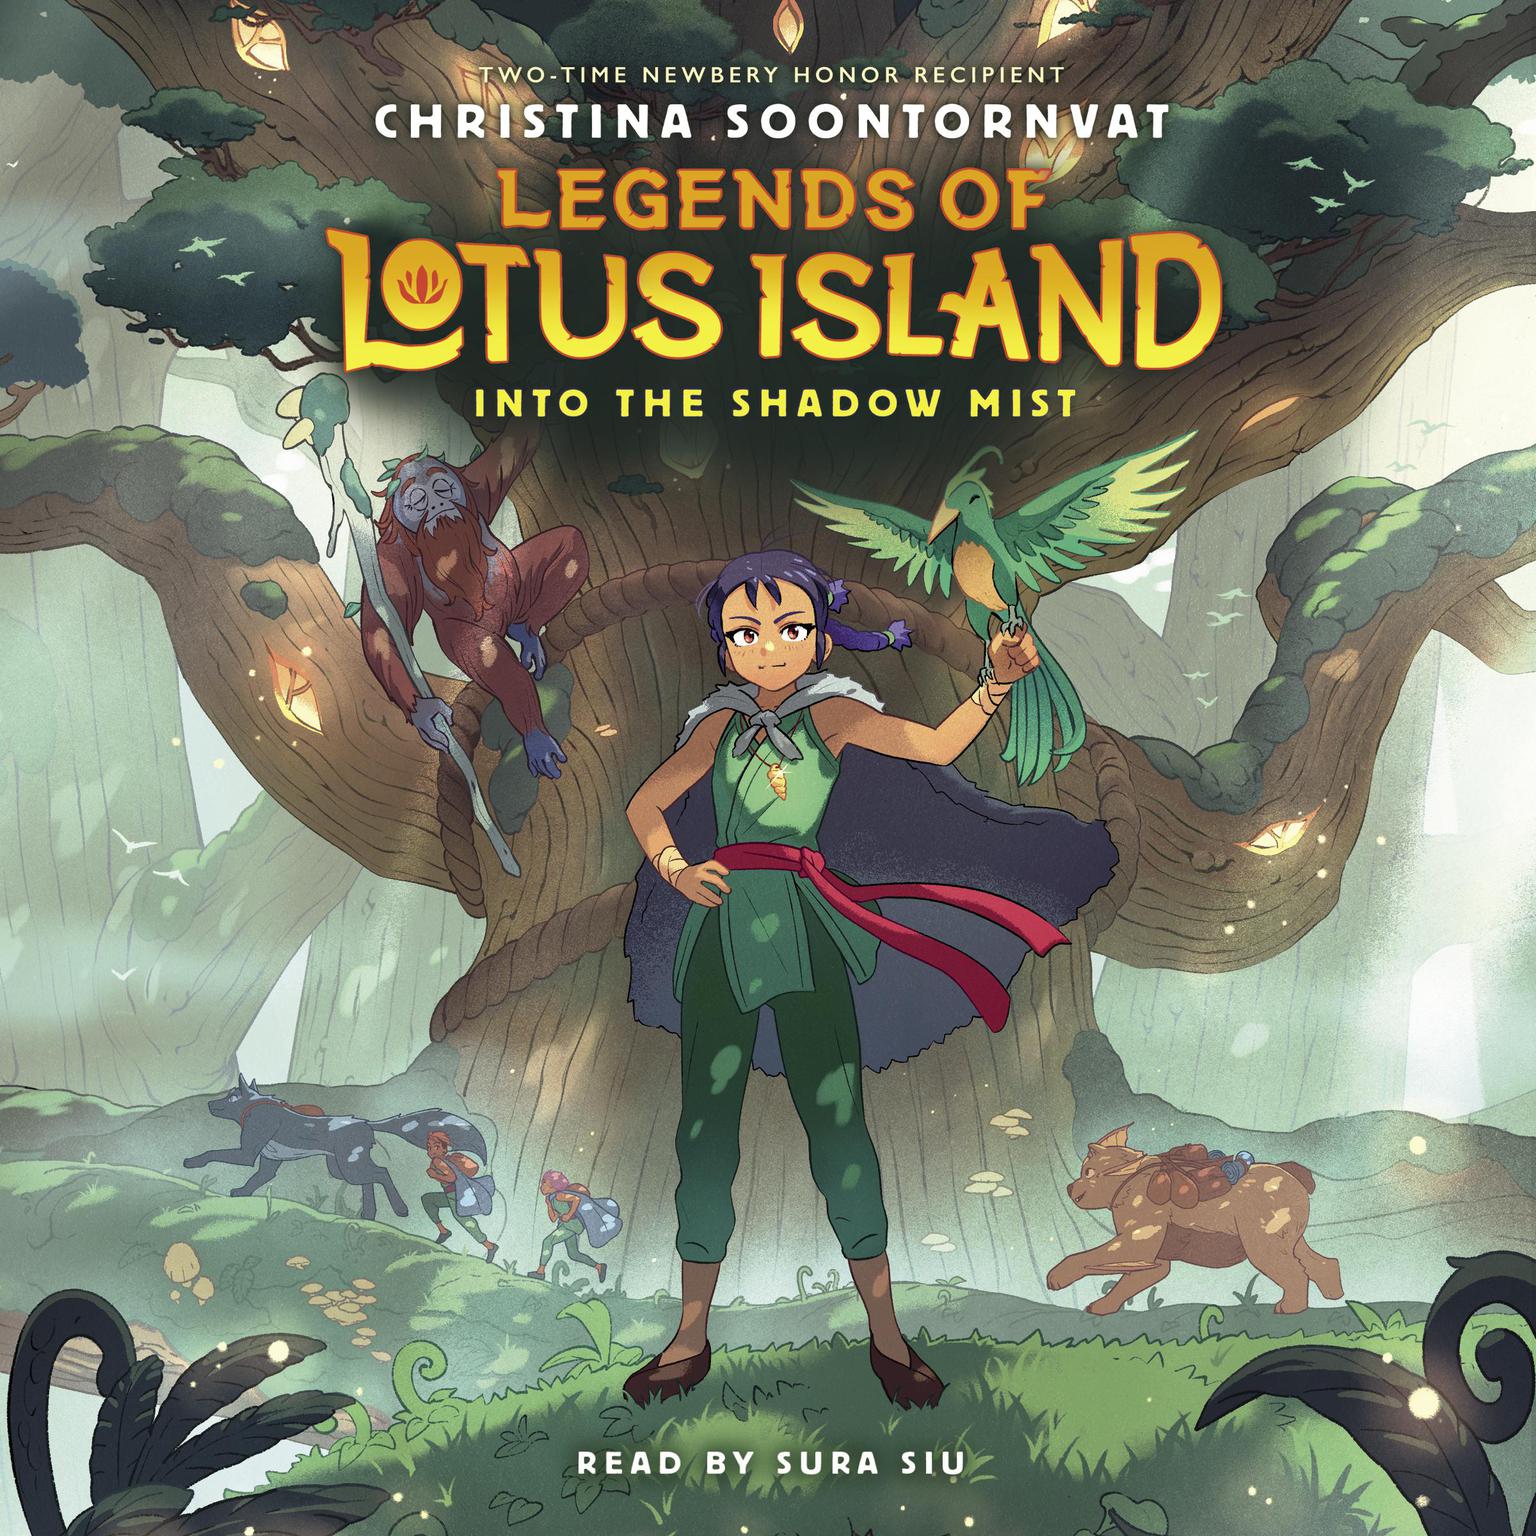 Into the Shadow Mist (Legends of Lotus Island #2) Audiobook, by Christina Soontornvat